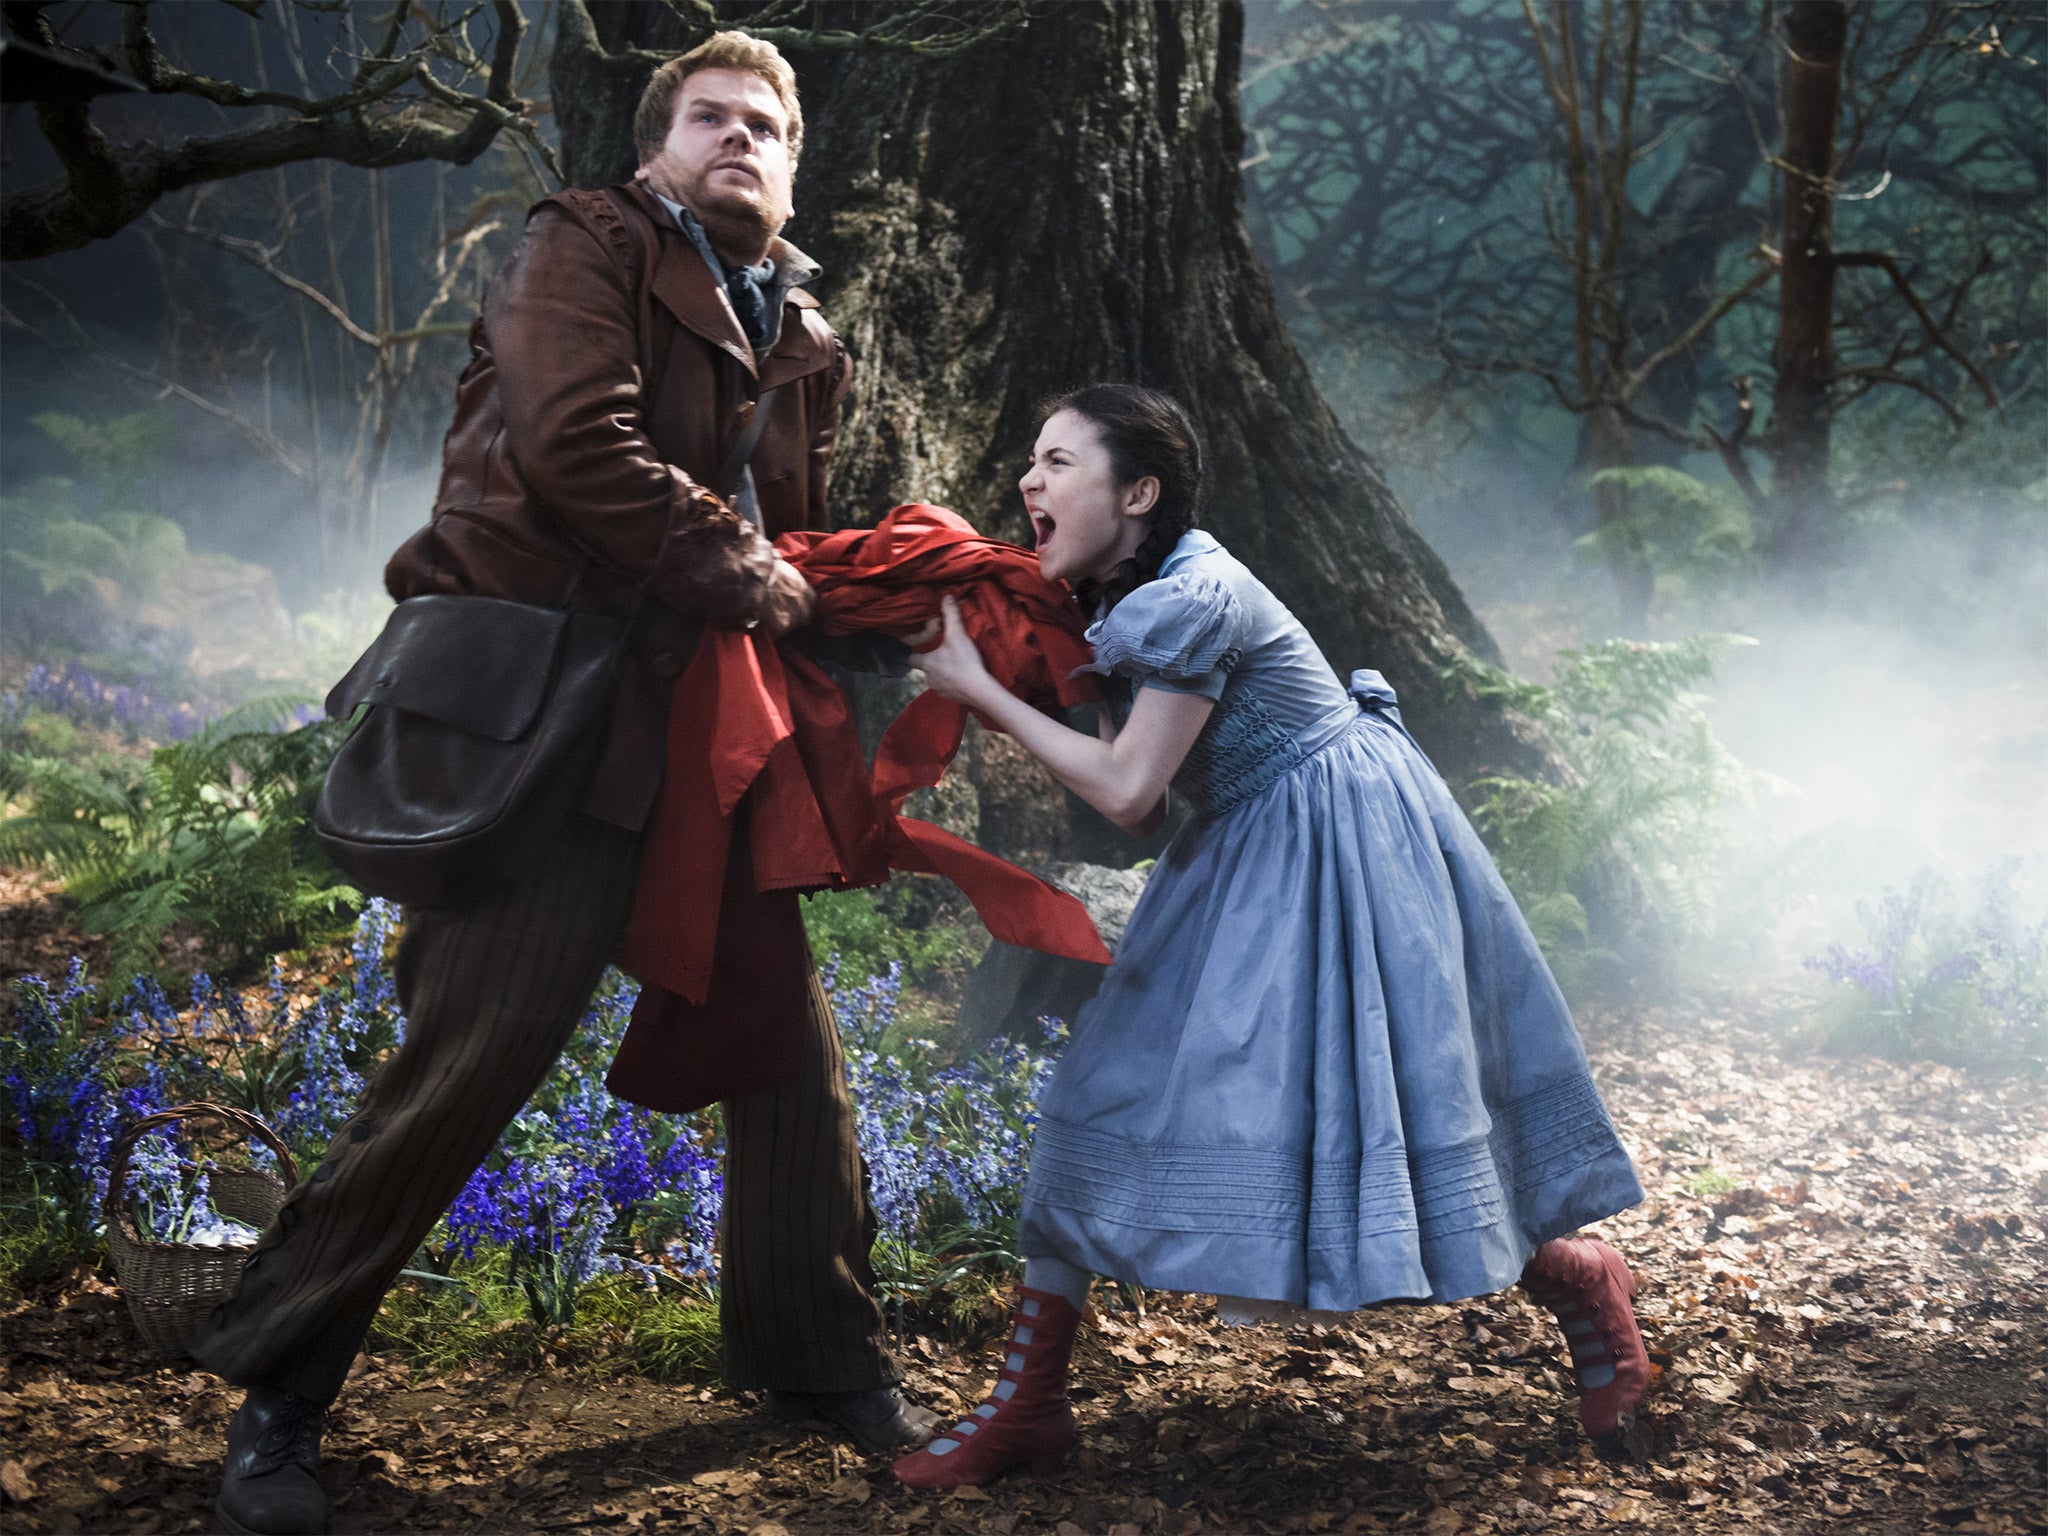 The Baker (James Corden) struggles with Lilla Crawford's Little Red Riding Hood